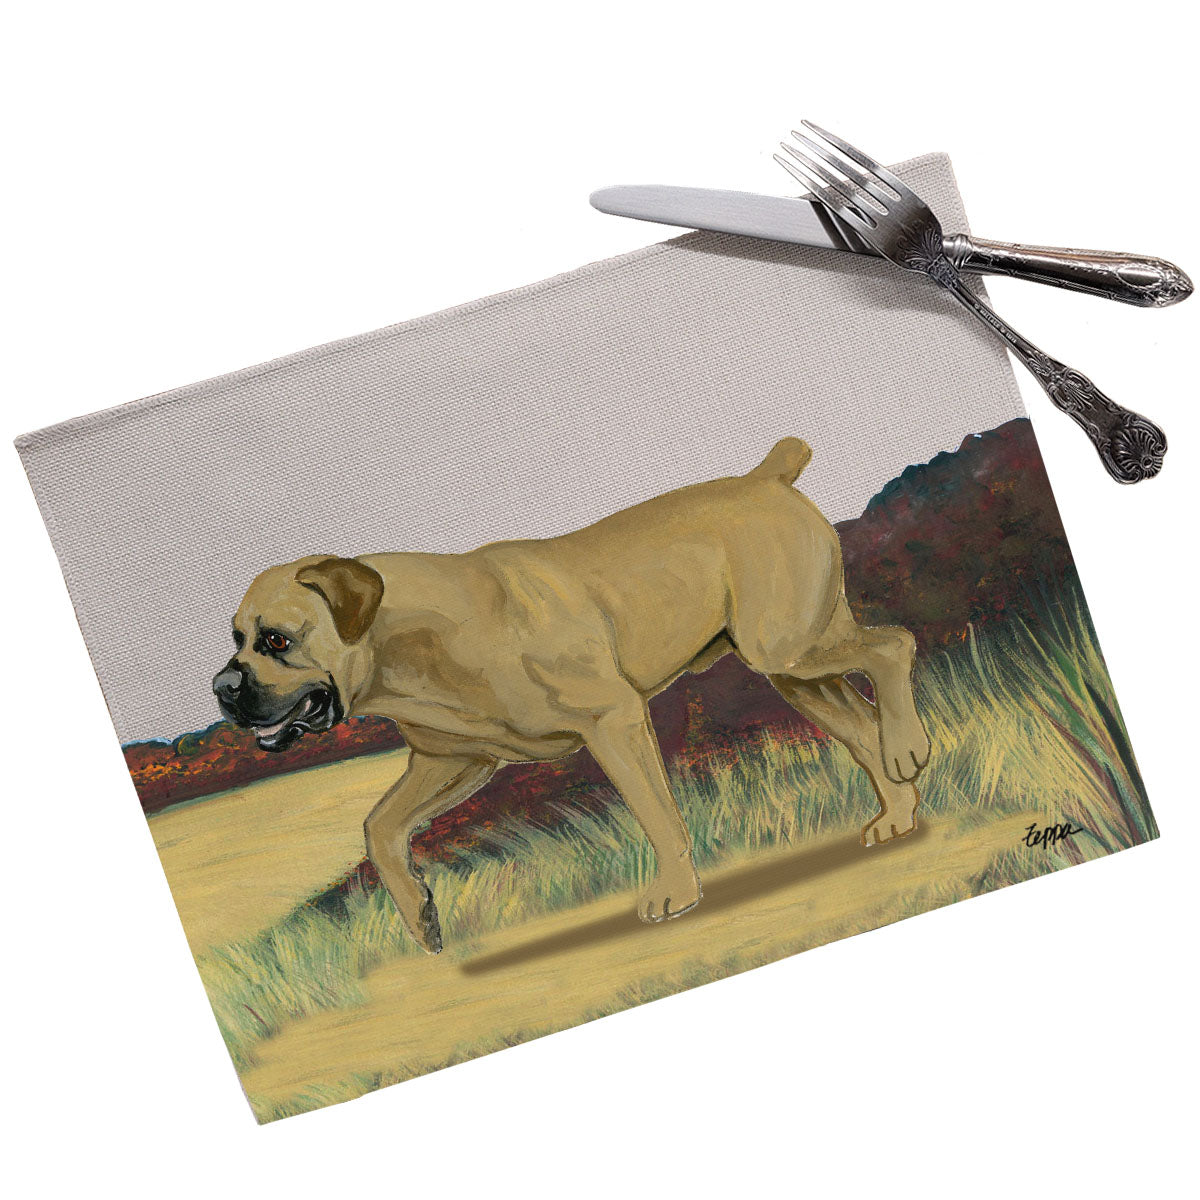 Boerboel Scenic Placemats